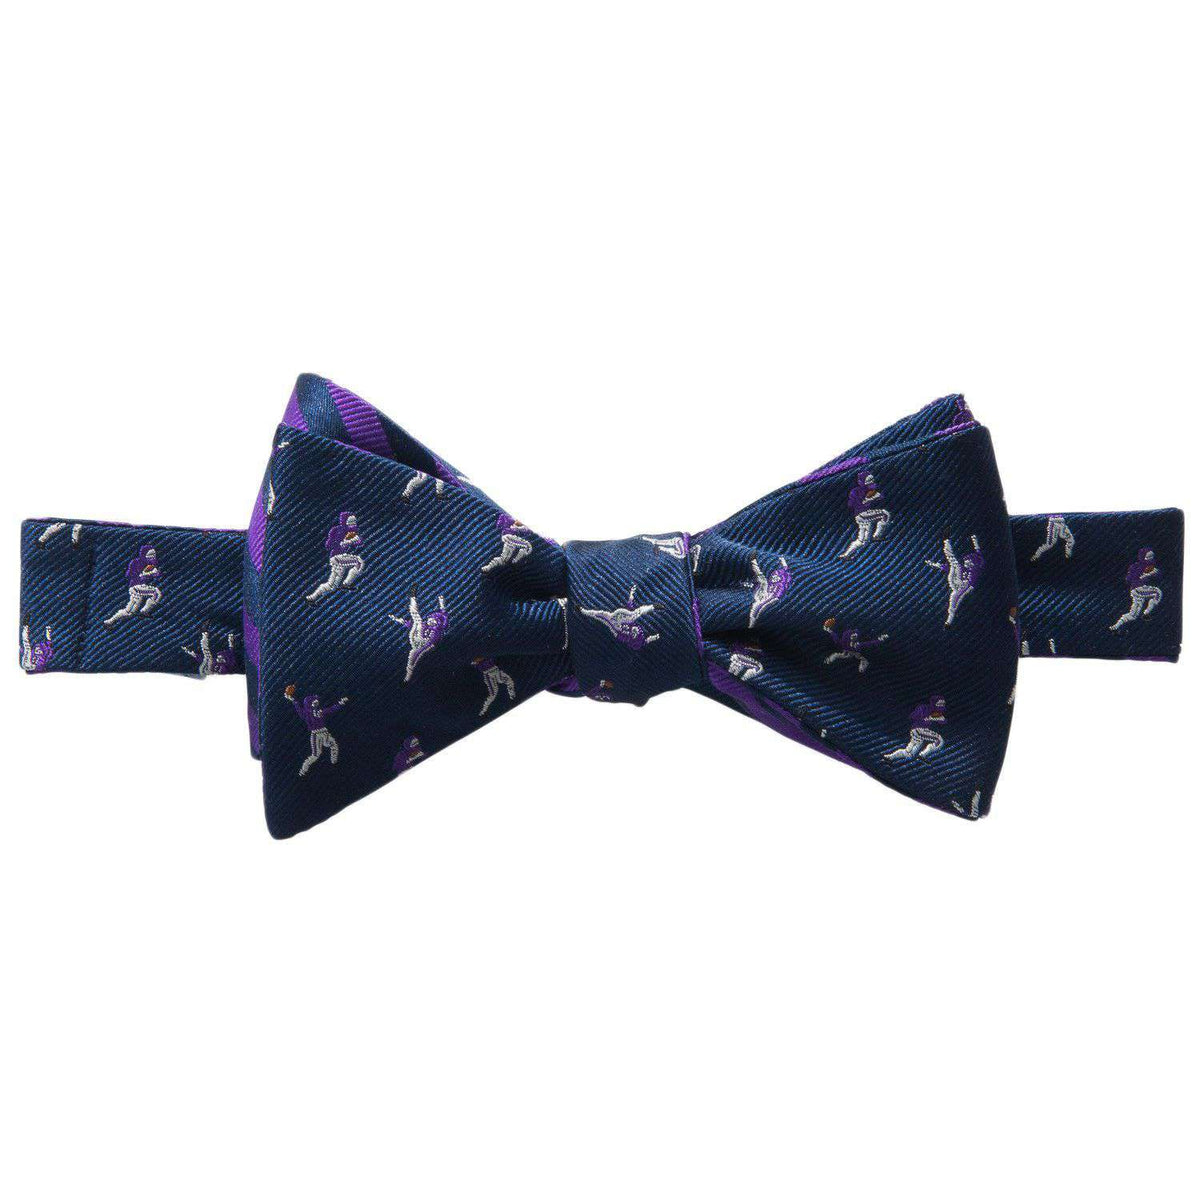 The Hangtime Reversible Bow Tie in Navy & Regal Purple by Southern Tide - Country Club Prep